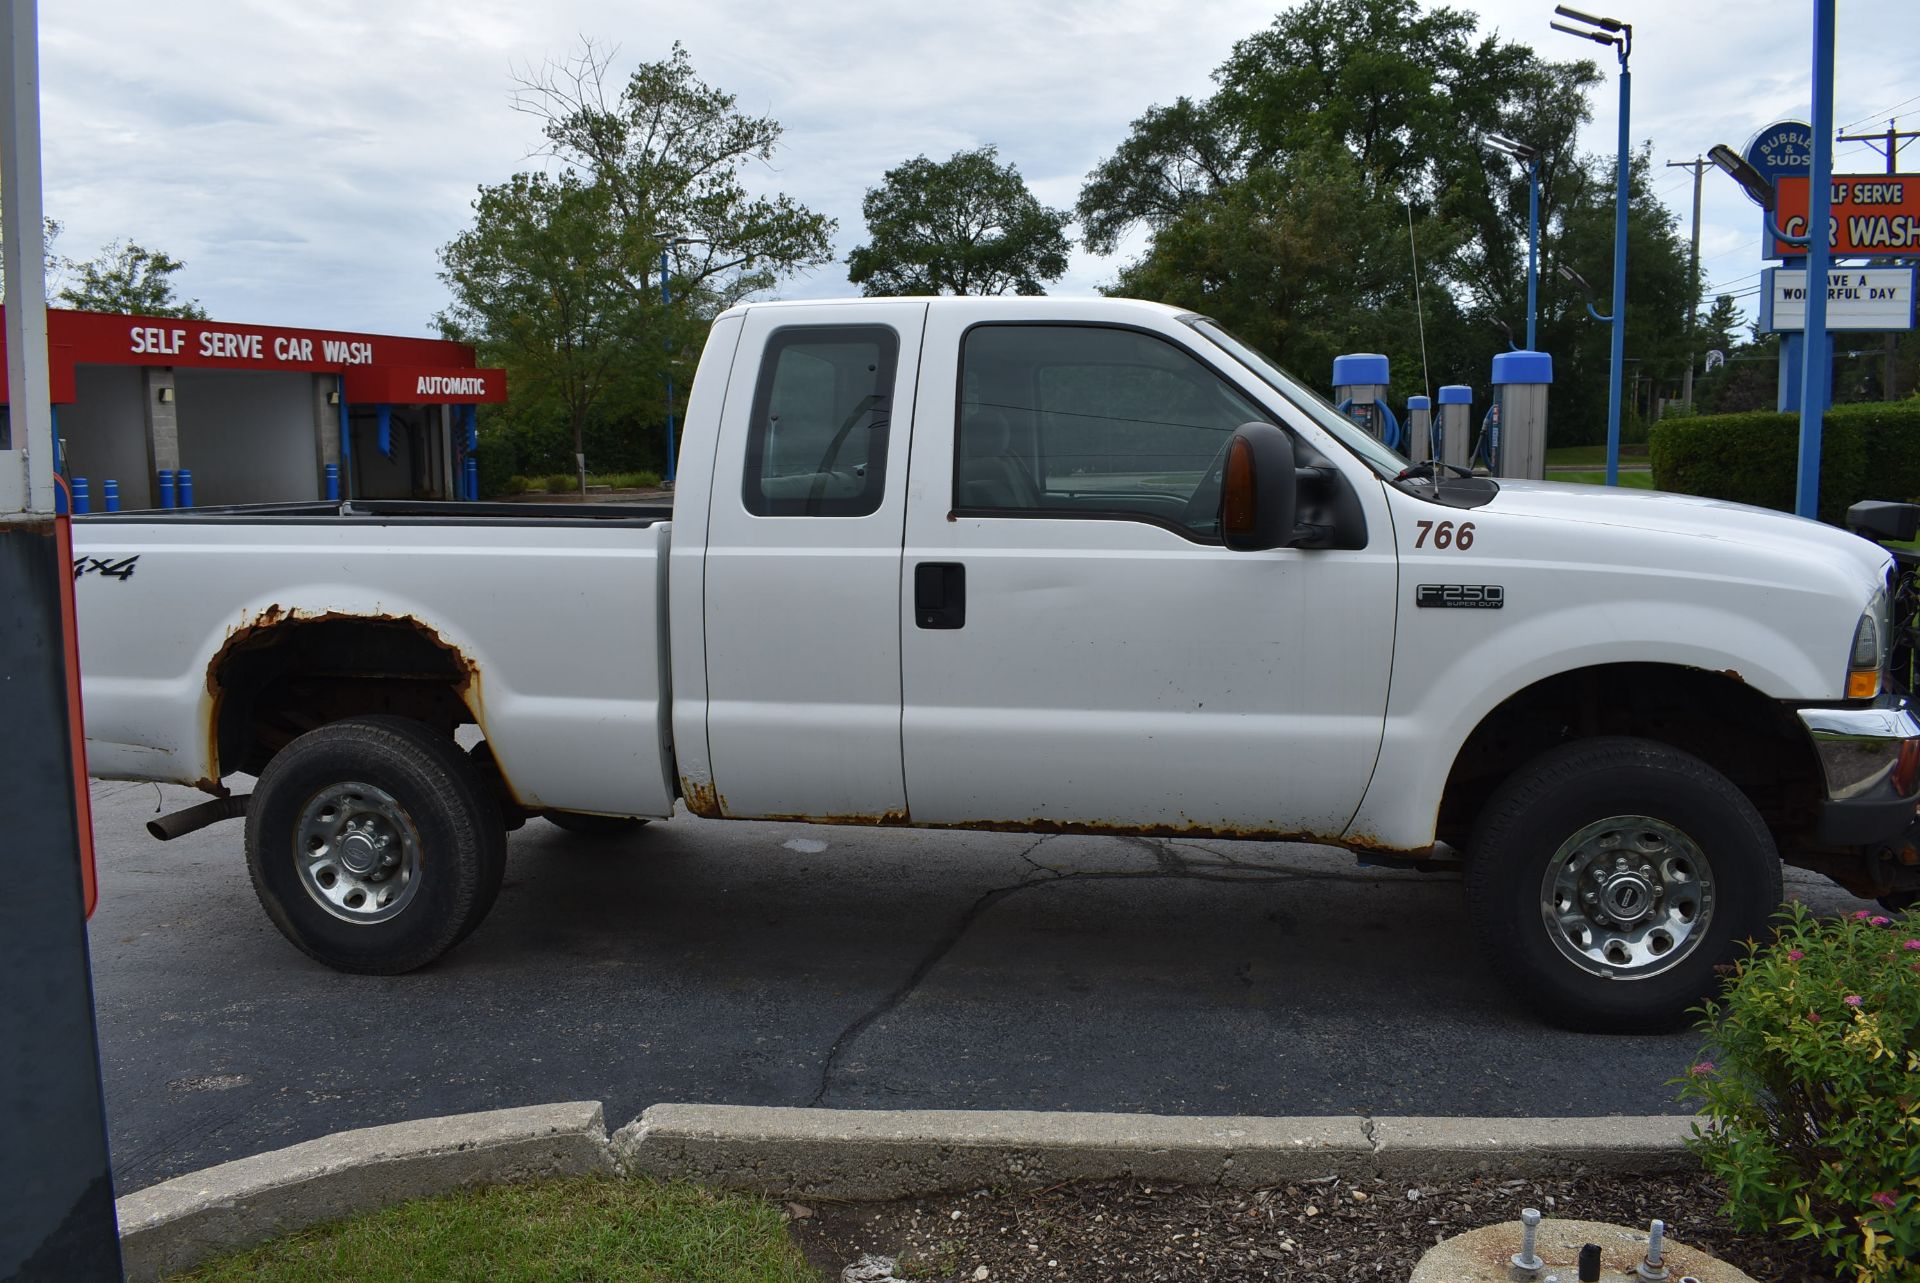 2004 FORD F250XLT SUPER DUTY EXTENDED CAB 4X4 PICKUP TRUCK VIN: 1FTNX21L94EB64345, V8, A/T, 142 IN - Image 5 of 12